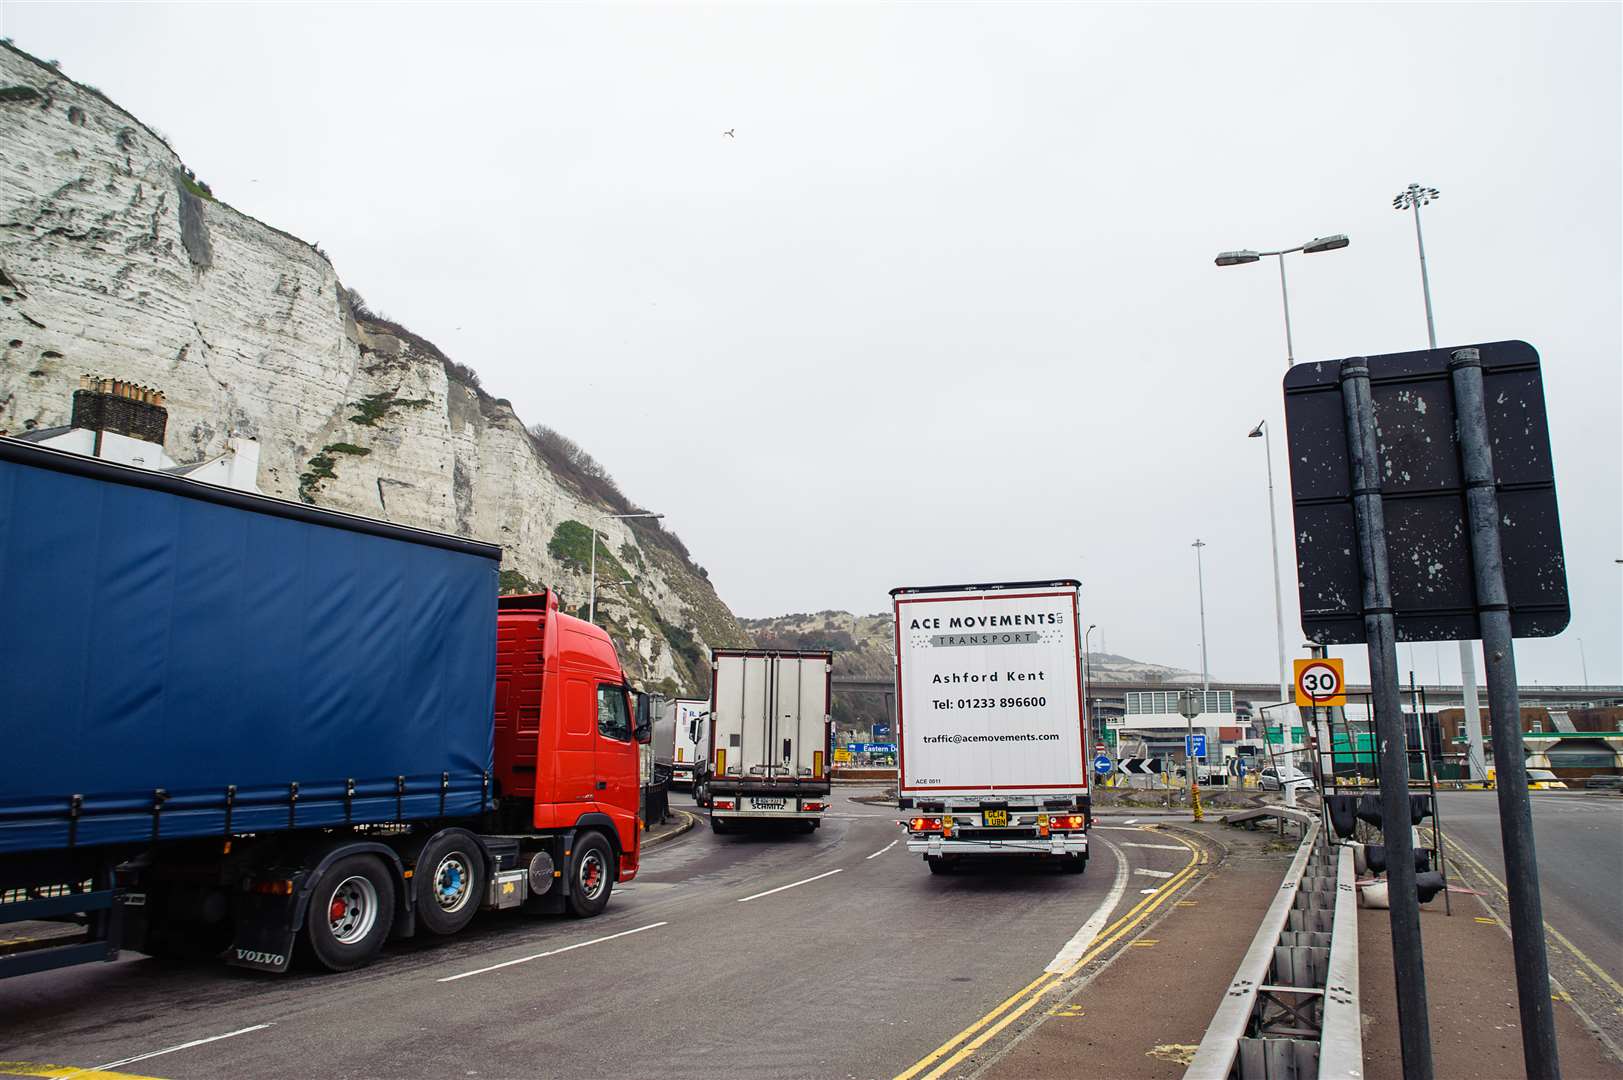 Traffic will be held outside of Dover until the port has space to accommodate the vehicles.